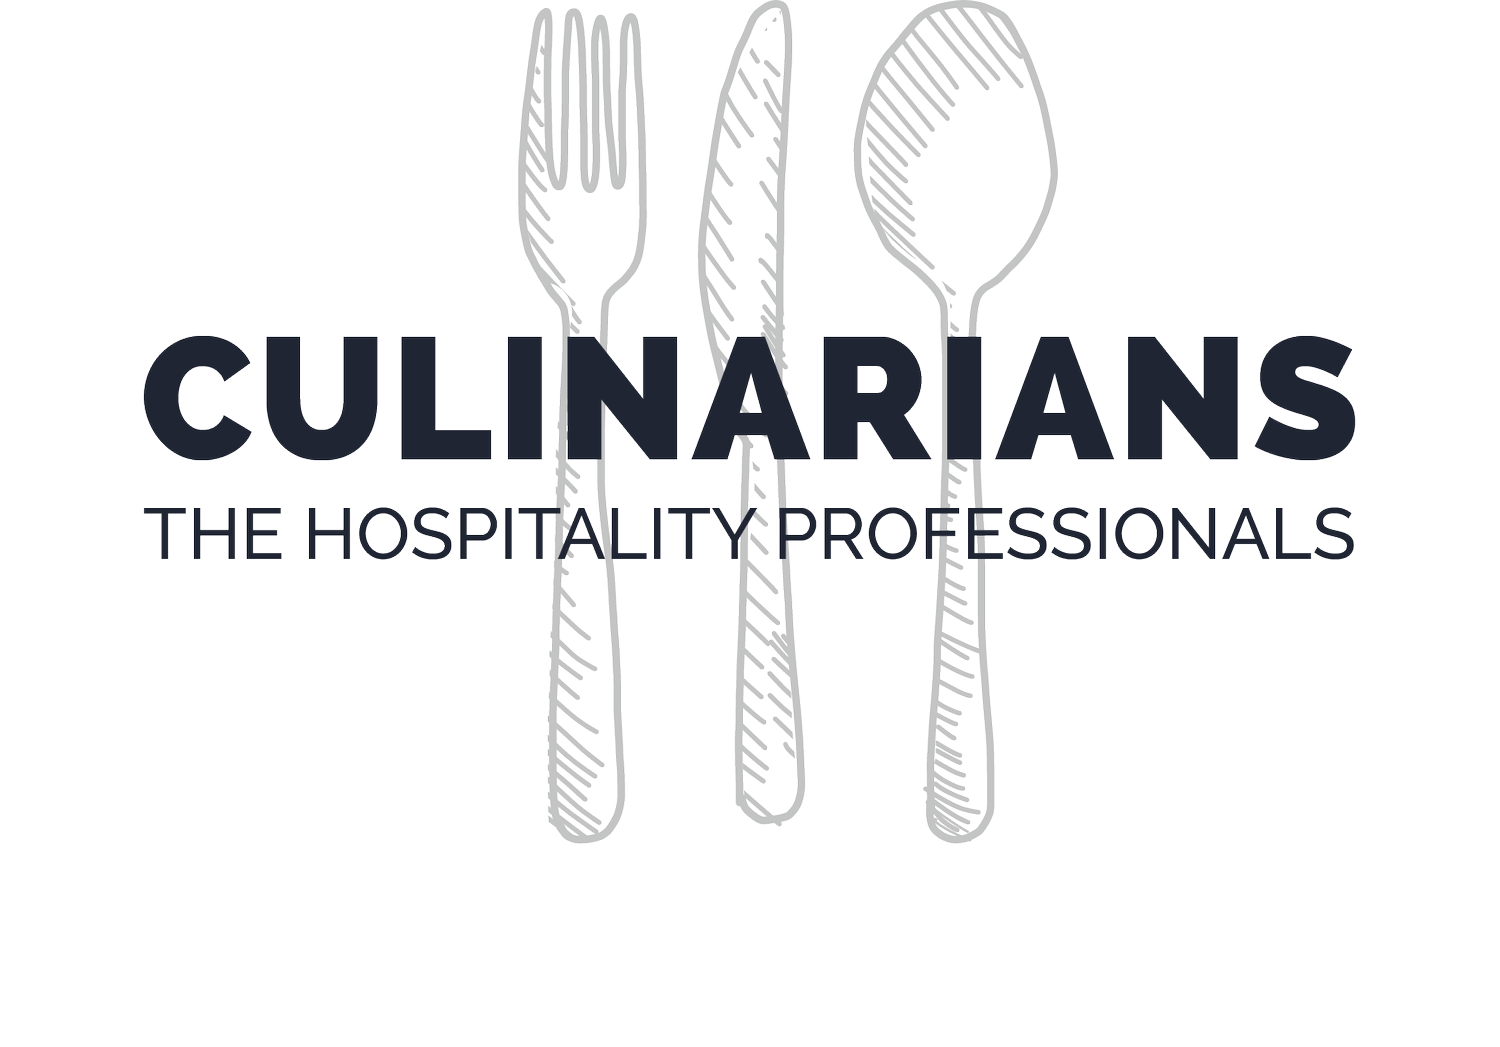 CULINARIANS The Hospitality Professionals